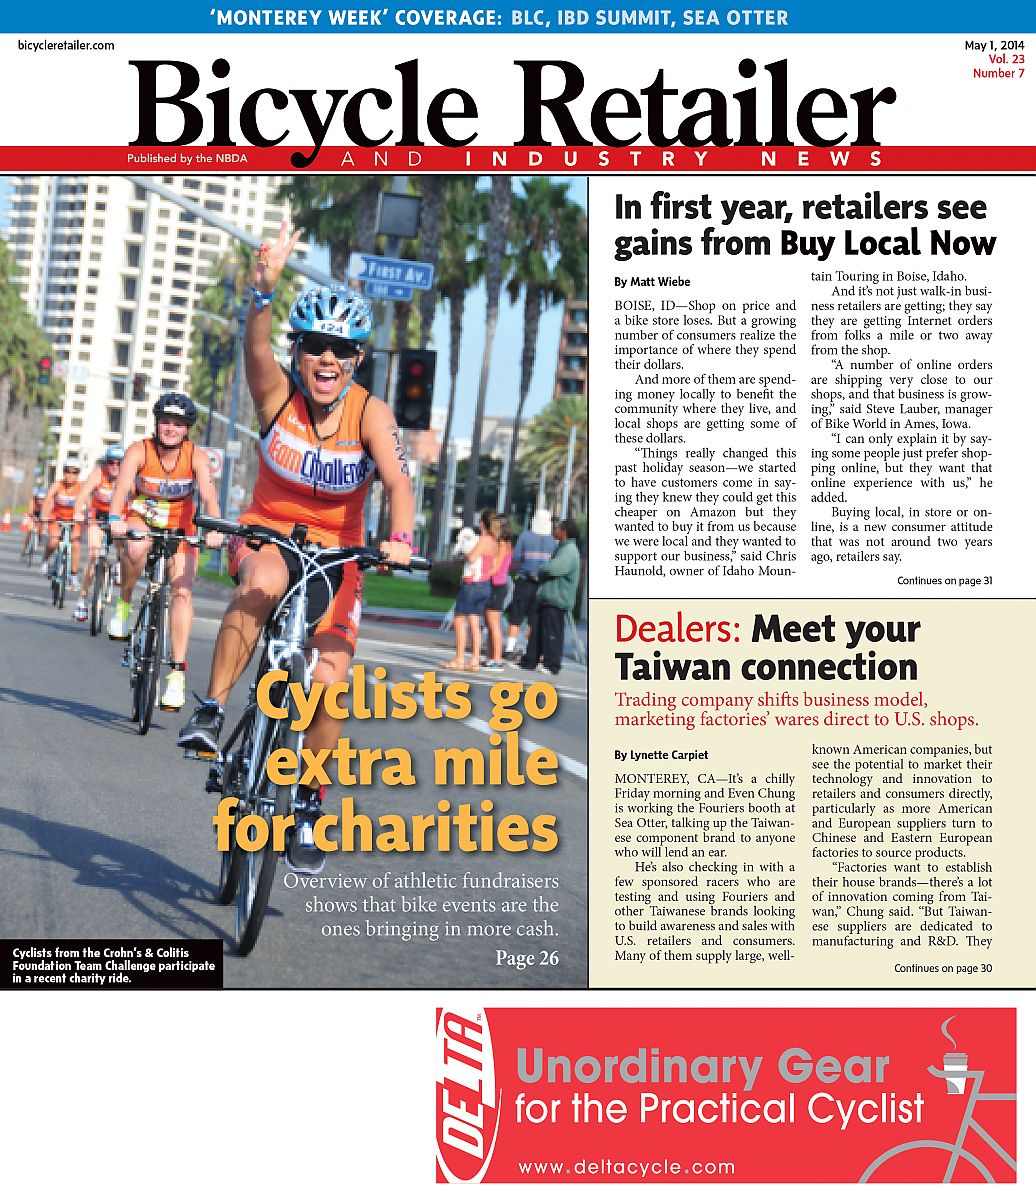 BRAIN News Digital magazine now available; Buy Local Now examined in May 1 issue Bicycle Retailer and Industry News